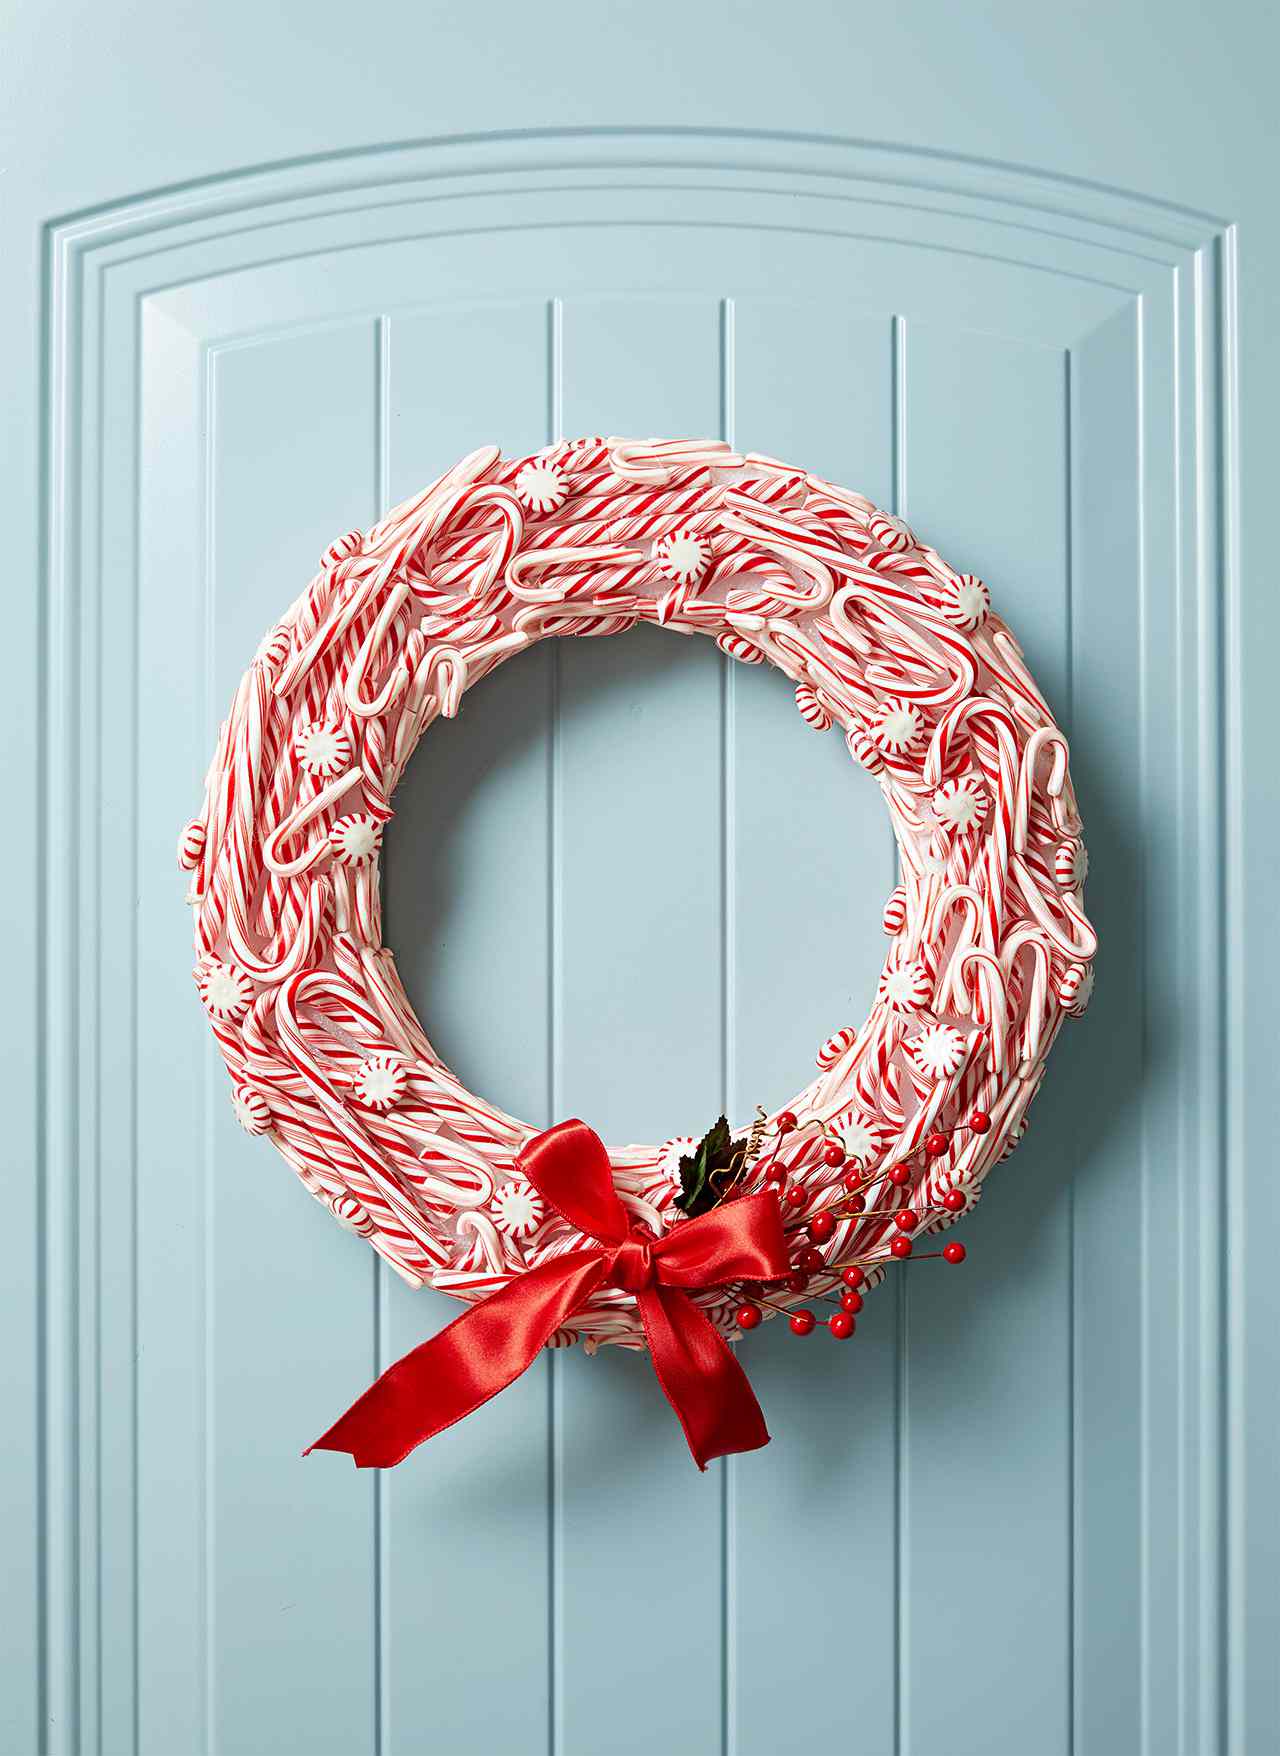 hanging red and white wreath with peppermint candies